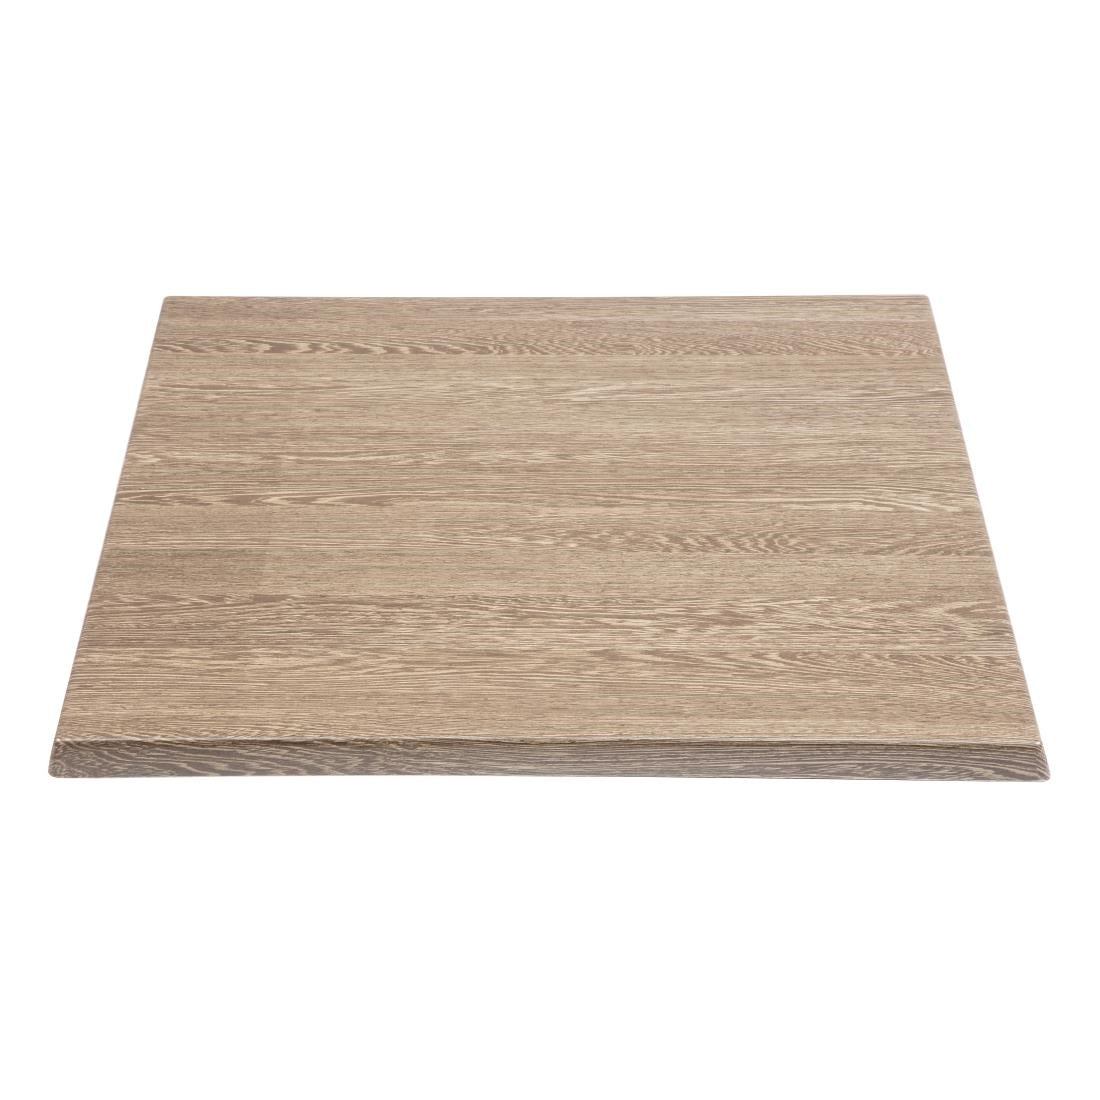 Bolero Pre-drilled Square Table Top Wenge Grain 700mm JD Catering Equipment Solutions Ltd